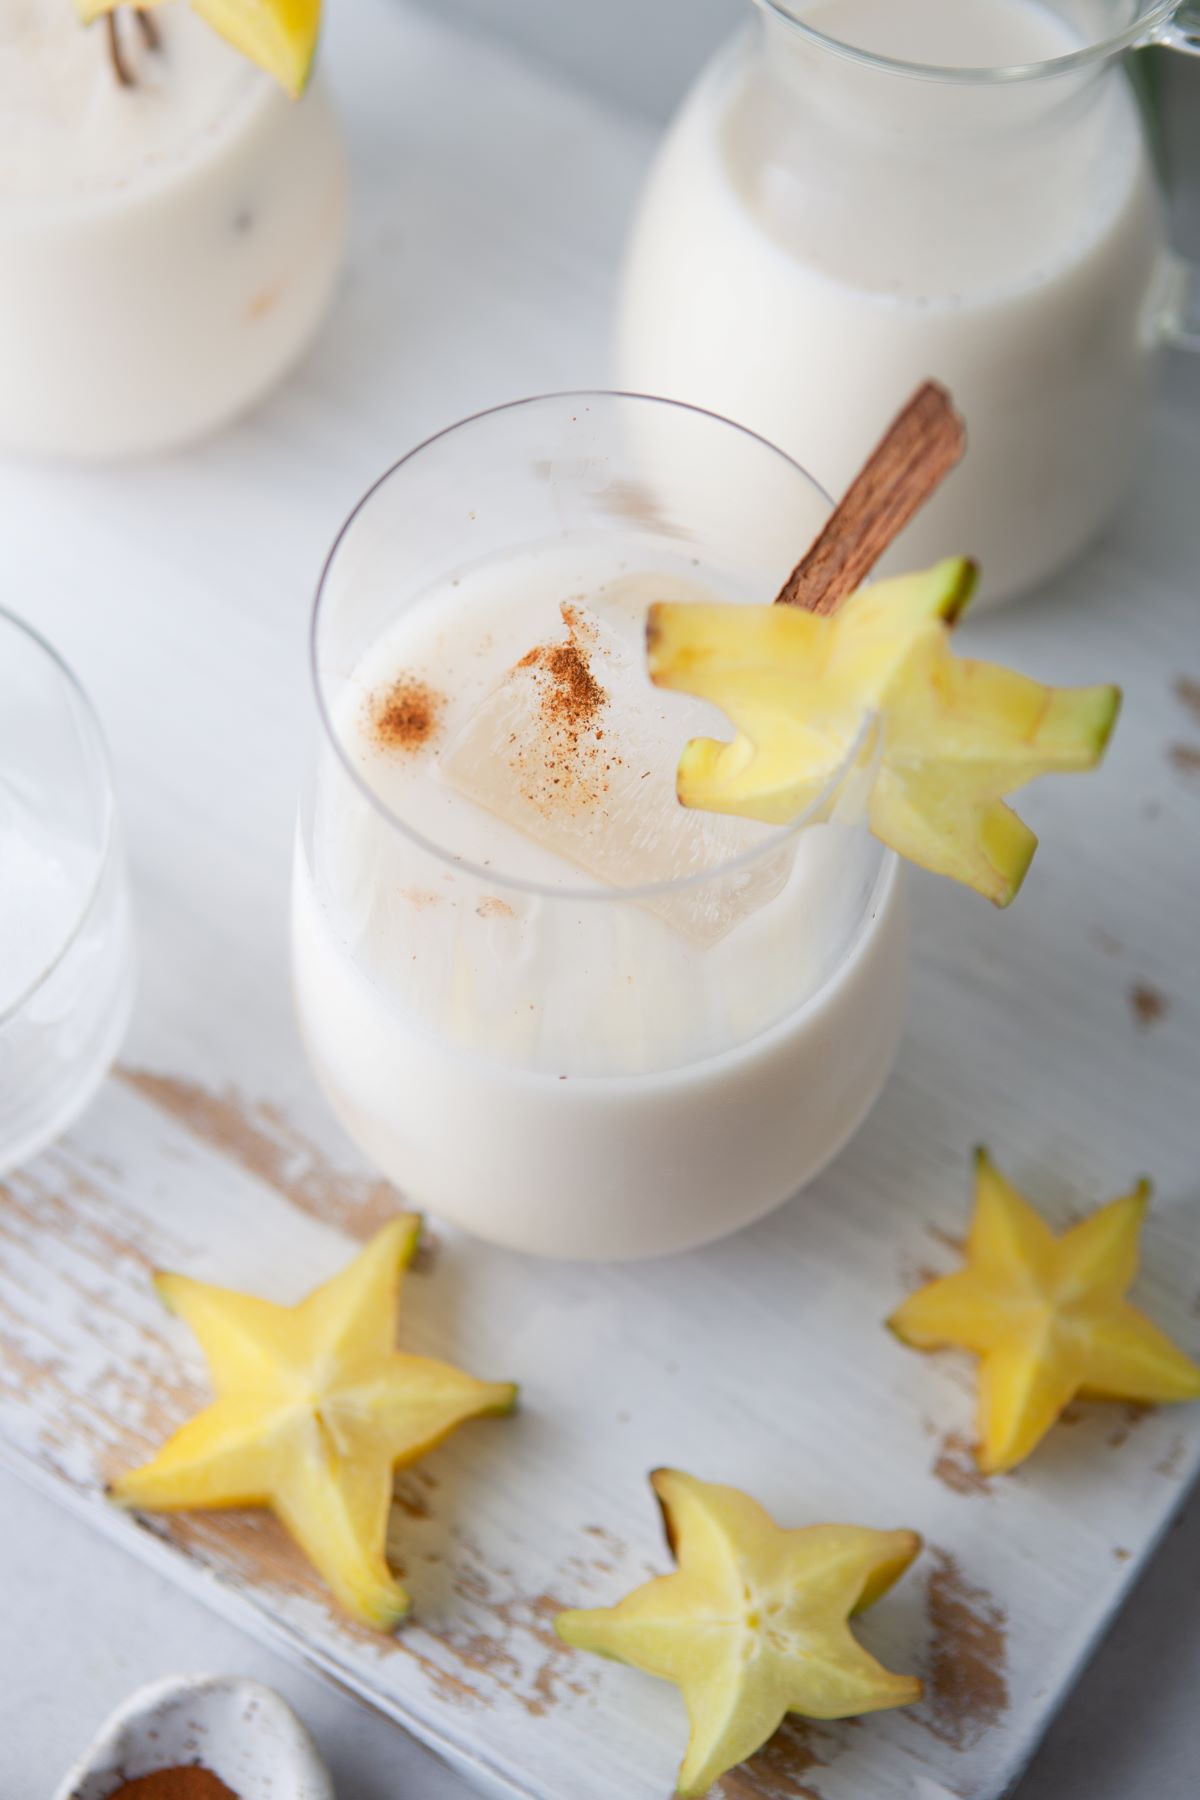 A glass filled with creamy homemade horchata garnished with a cinnamon stick and starfruit.